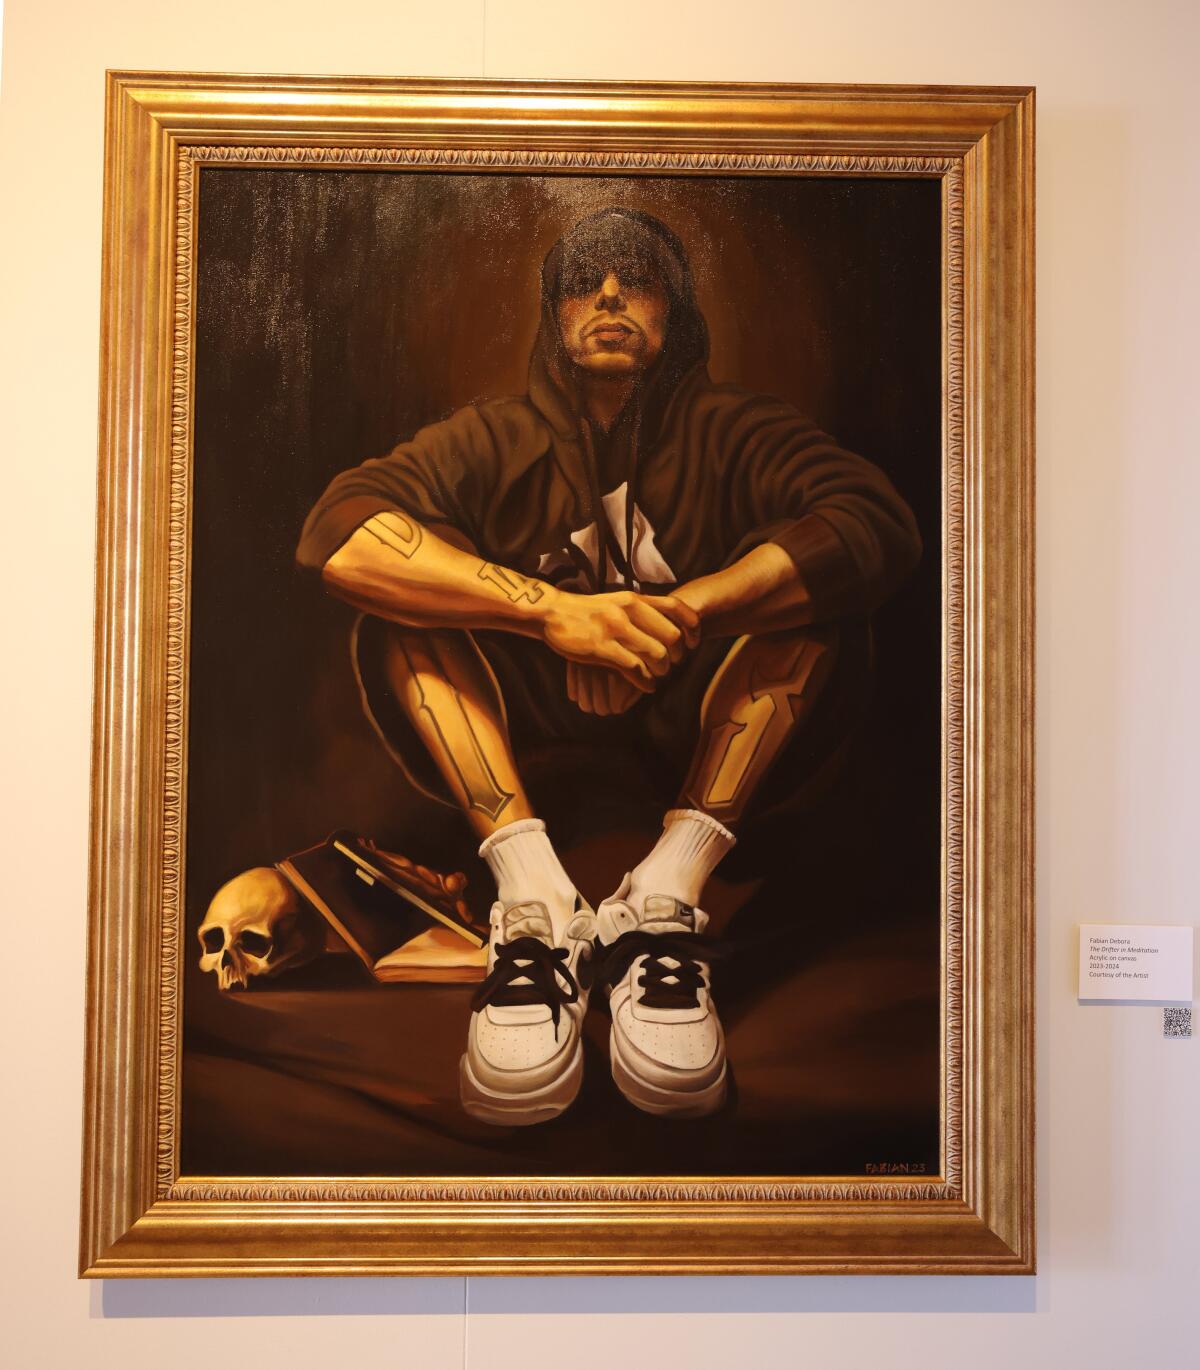 Artist Fabian Debora's painting "The Drifter in Meditation" shows a man in a hoodie sitting with his arms on his knees.